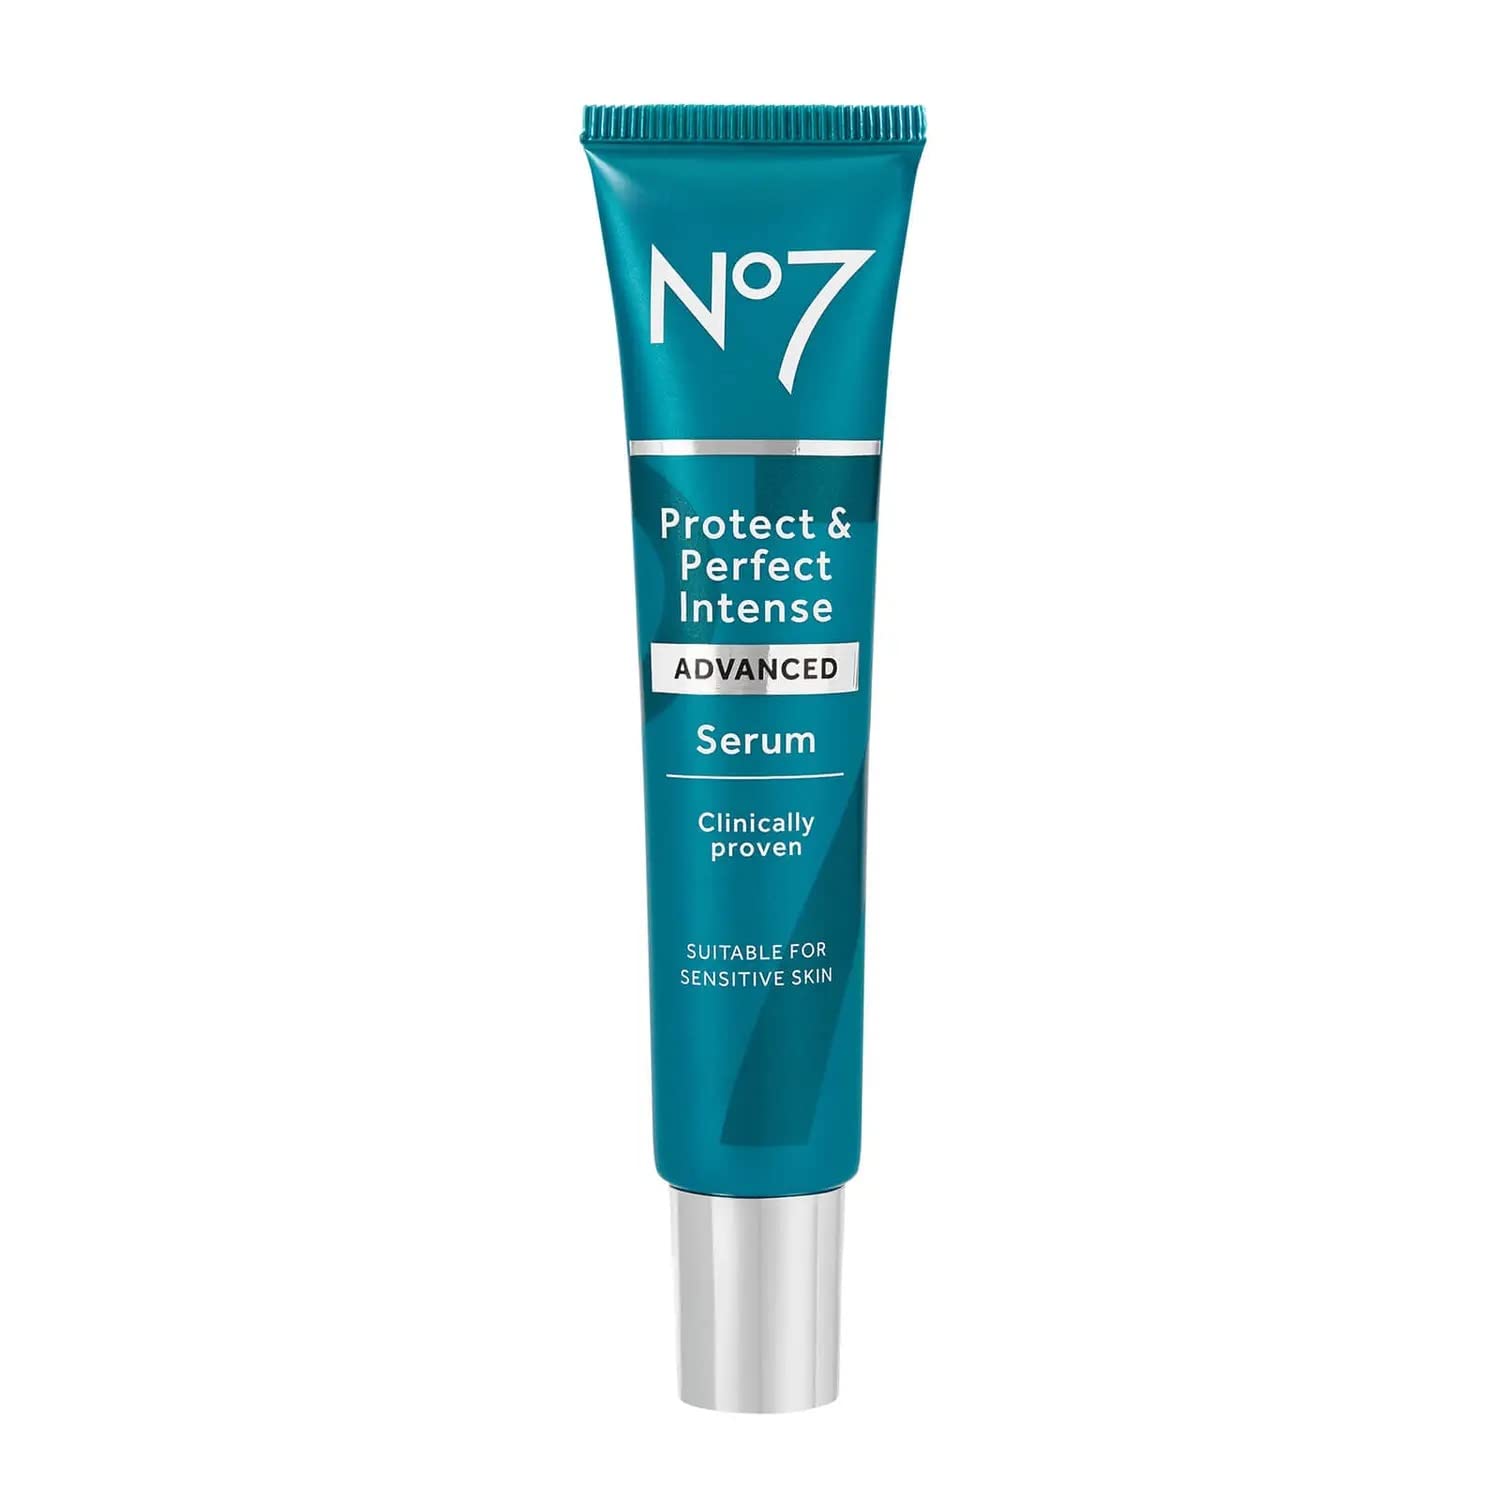 No7 Protect & Perfect Intense Advanced Serum - Rice Protein & Alfalfa Complex for Fine Lines and Wrinkles - Anti Aging Facial Serum with Matrix 3000+ Technology (30 )